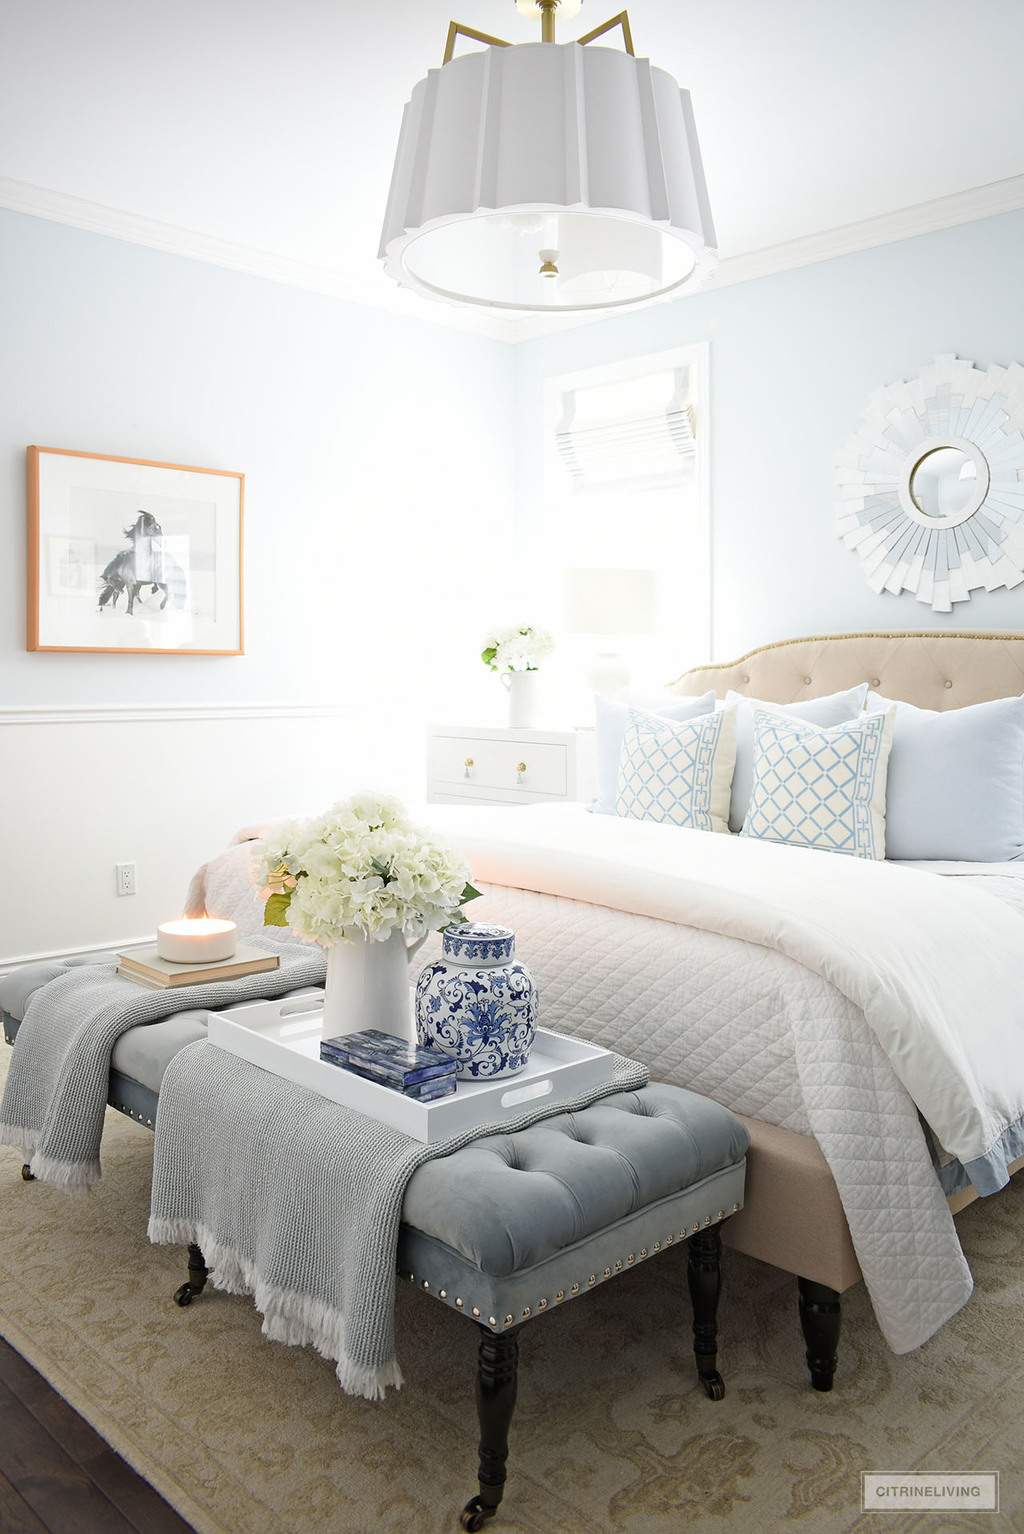 Gorgeous winter bedroom decorating with layers of white quilted bedding light blue and white pillows, and a beautiful upholstered bench at the foot of the bed with pretty accessories.